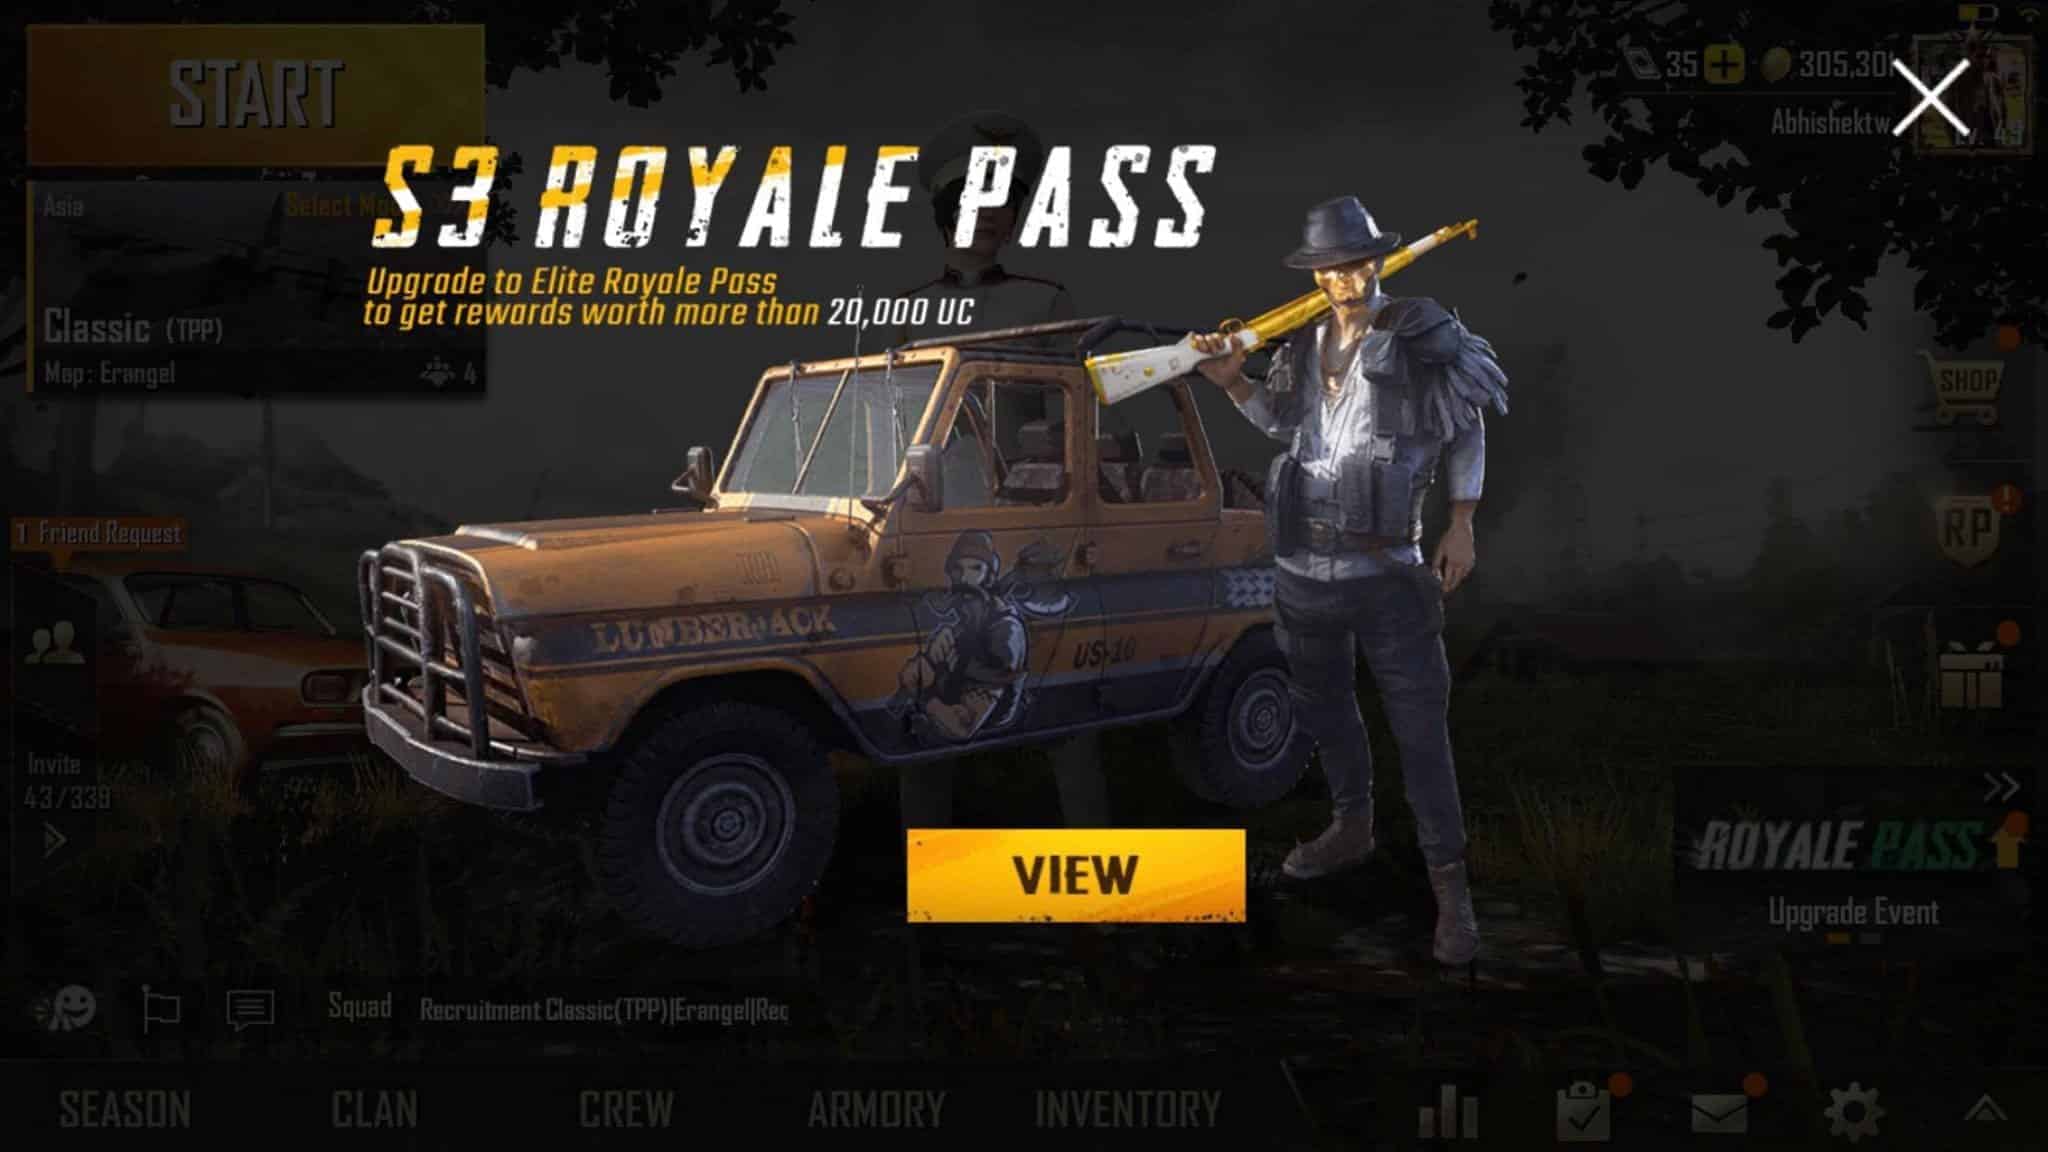 PUBG Mobile Season 3 with new Royale Pass update is here!